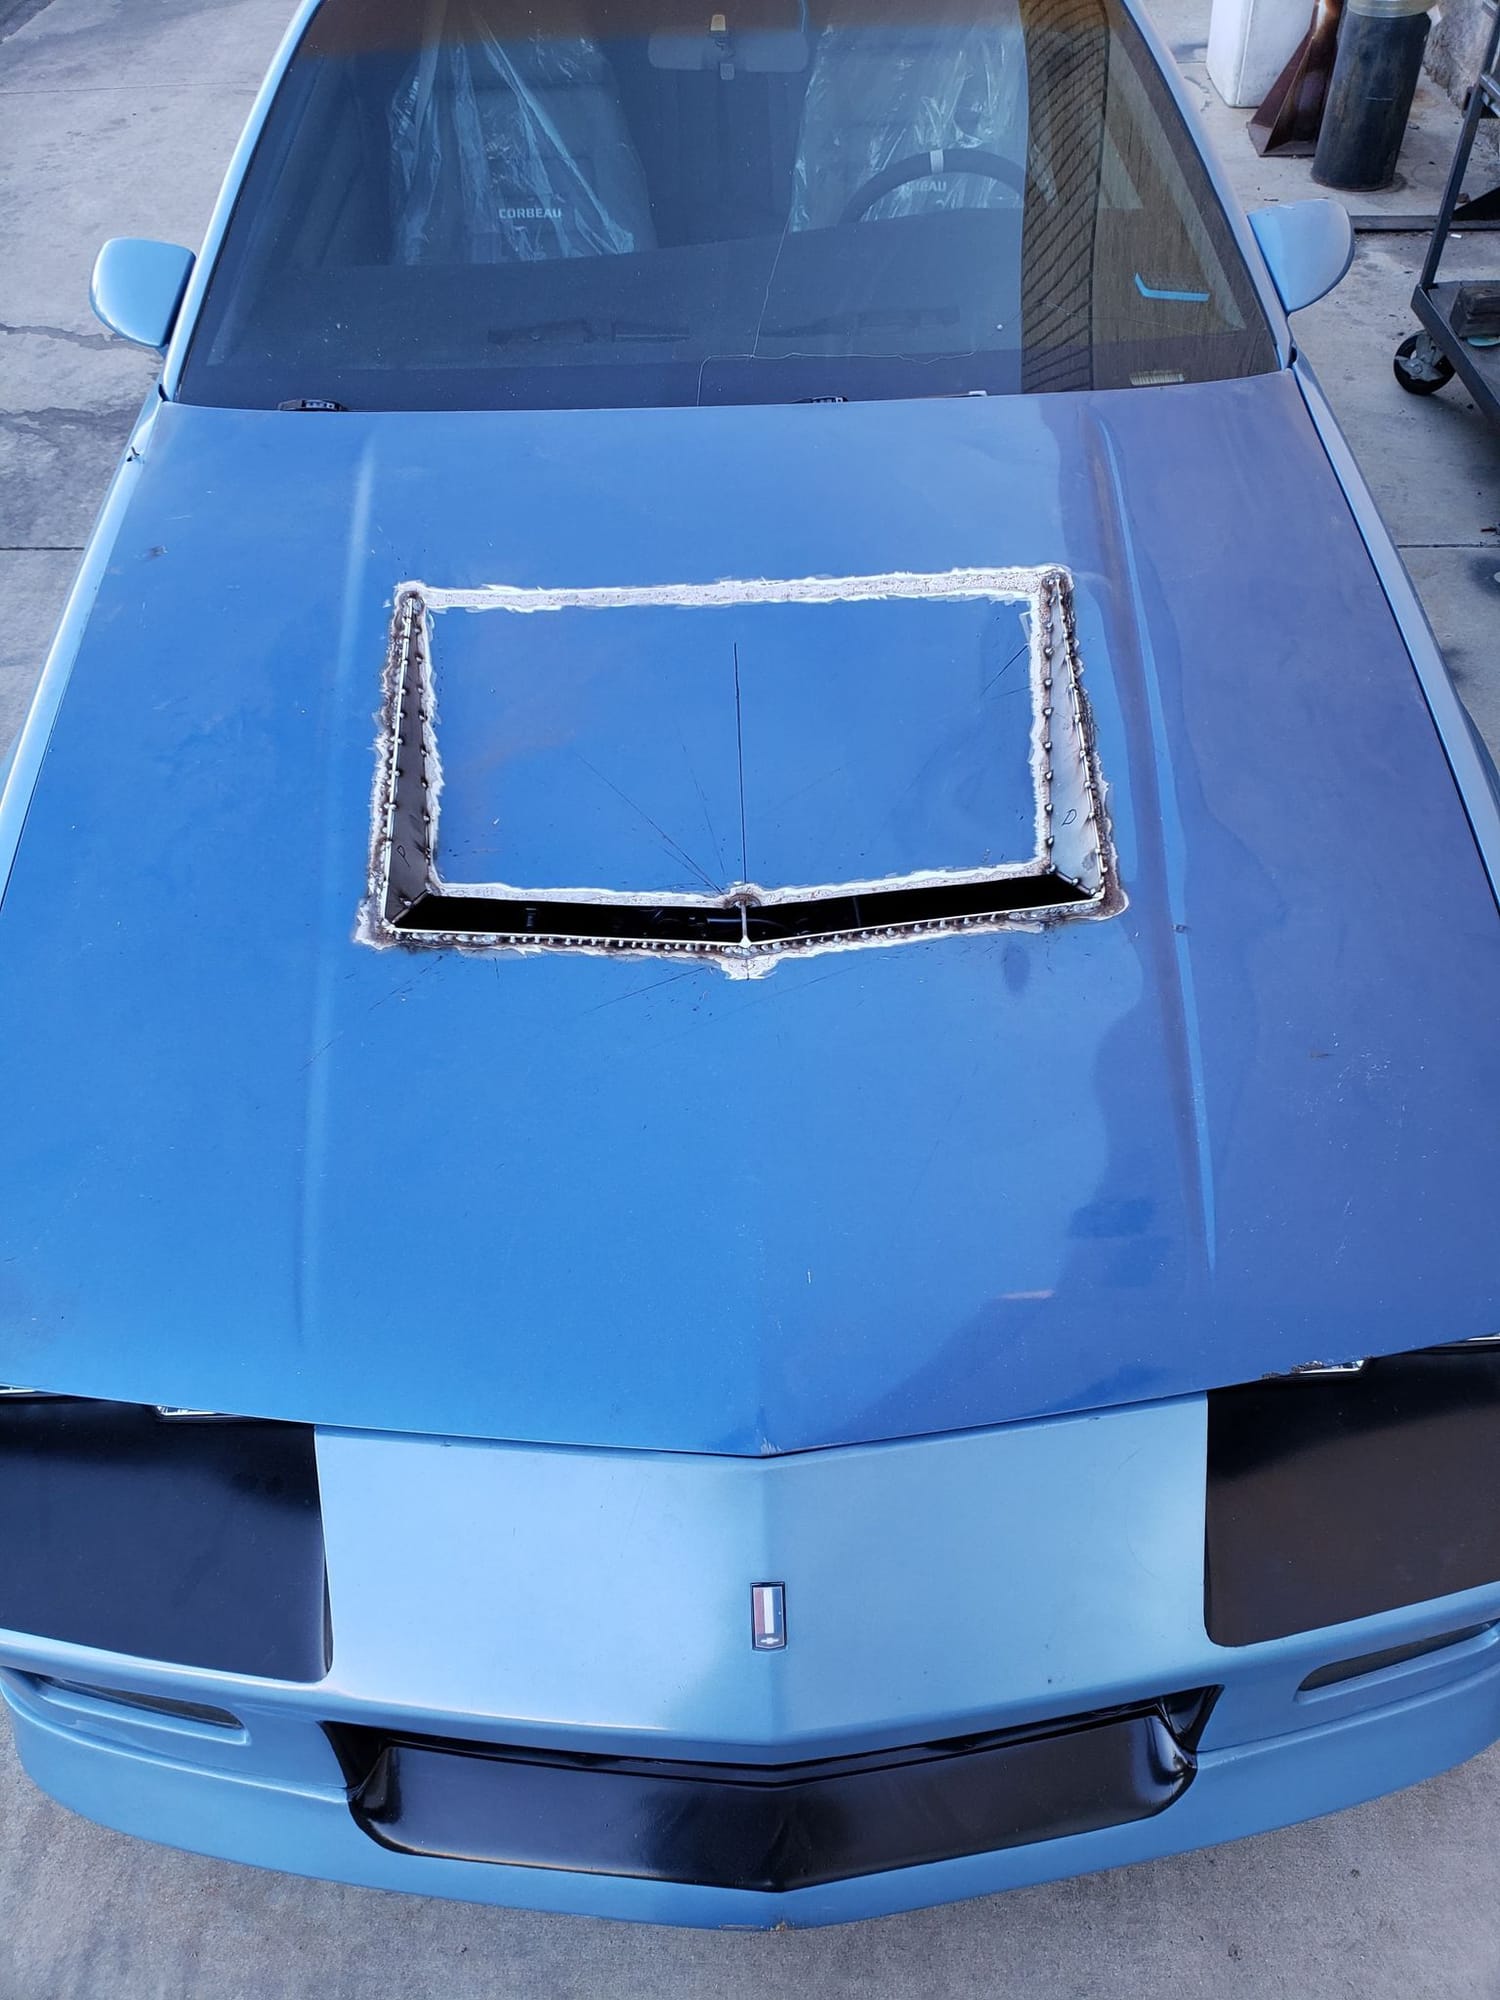 Lt1 takes 103 octane gas? - LS1TECH - Camaro and Firebird Forum Discussion